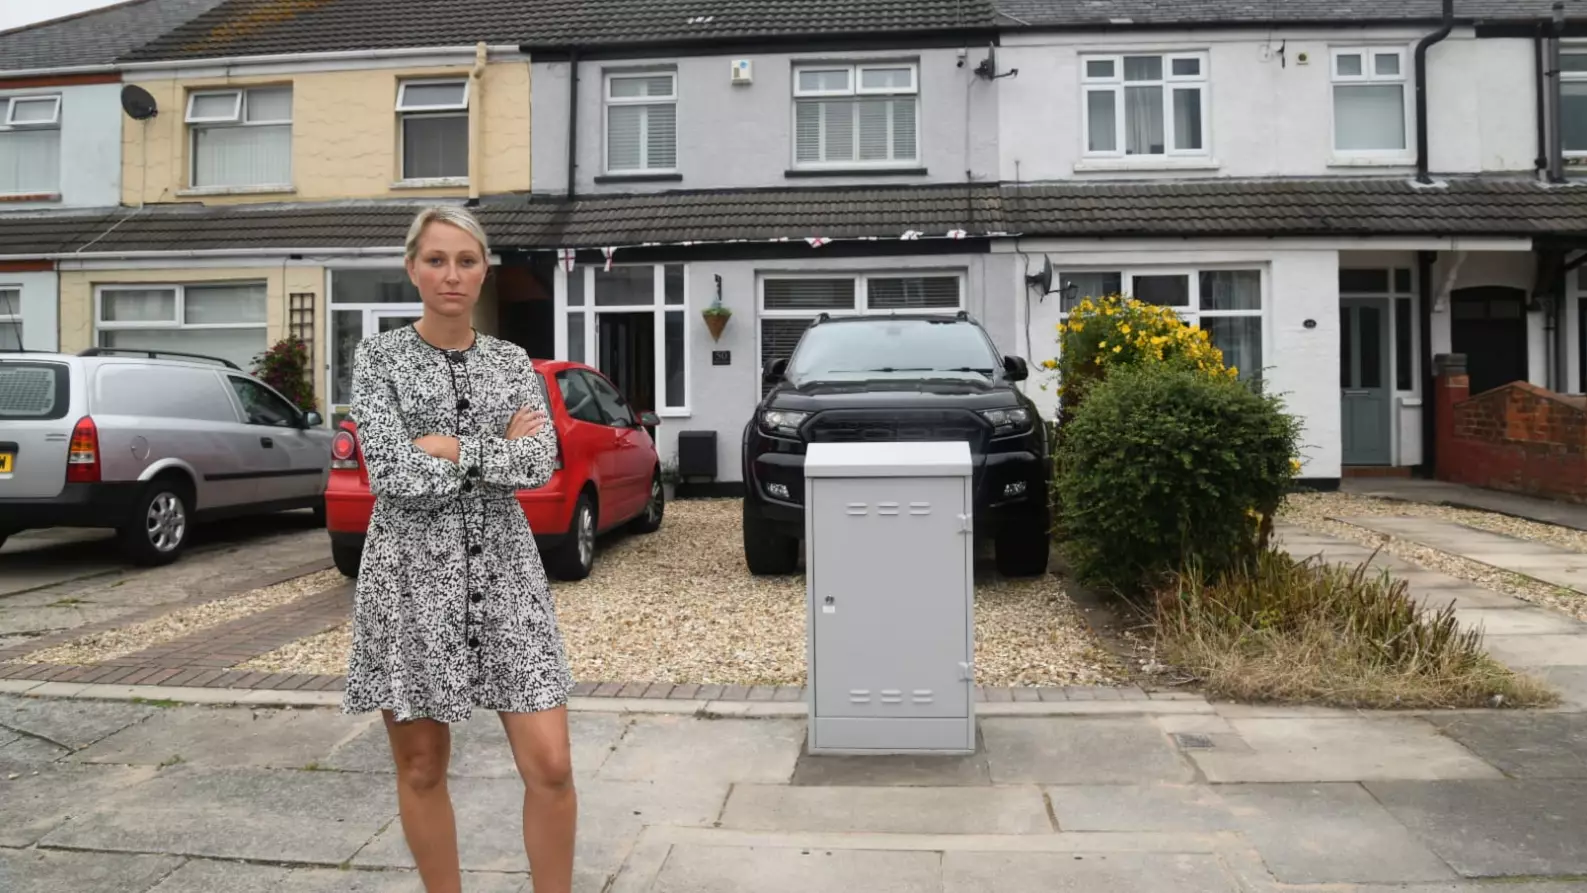 Woman 'In Tears' After Virgin Media Installs Massive New Junction Box Across Her Drive